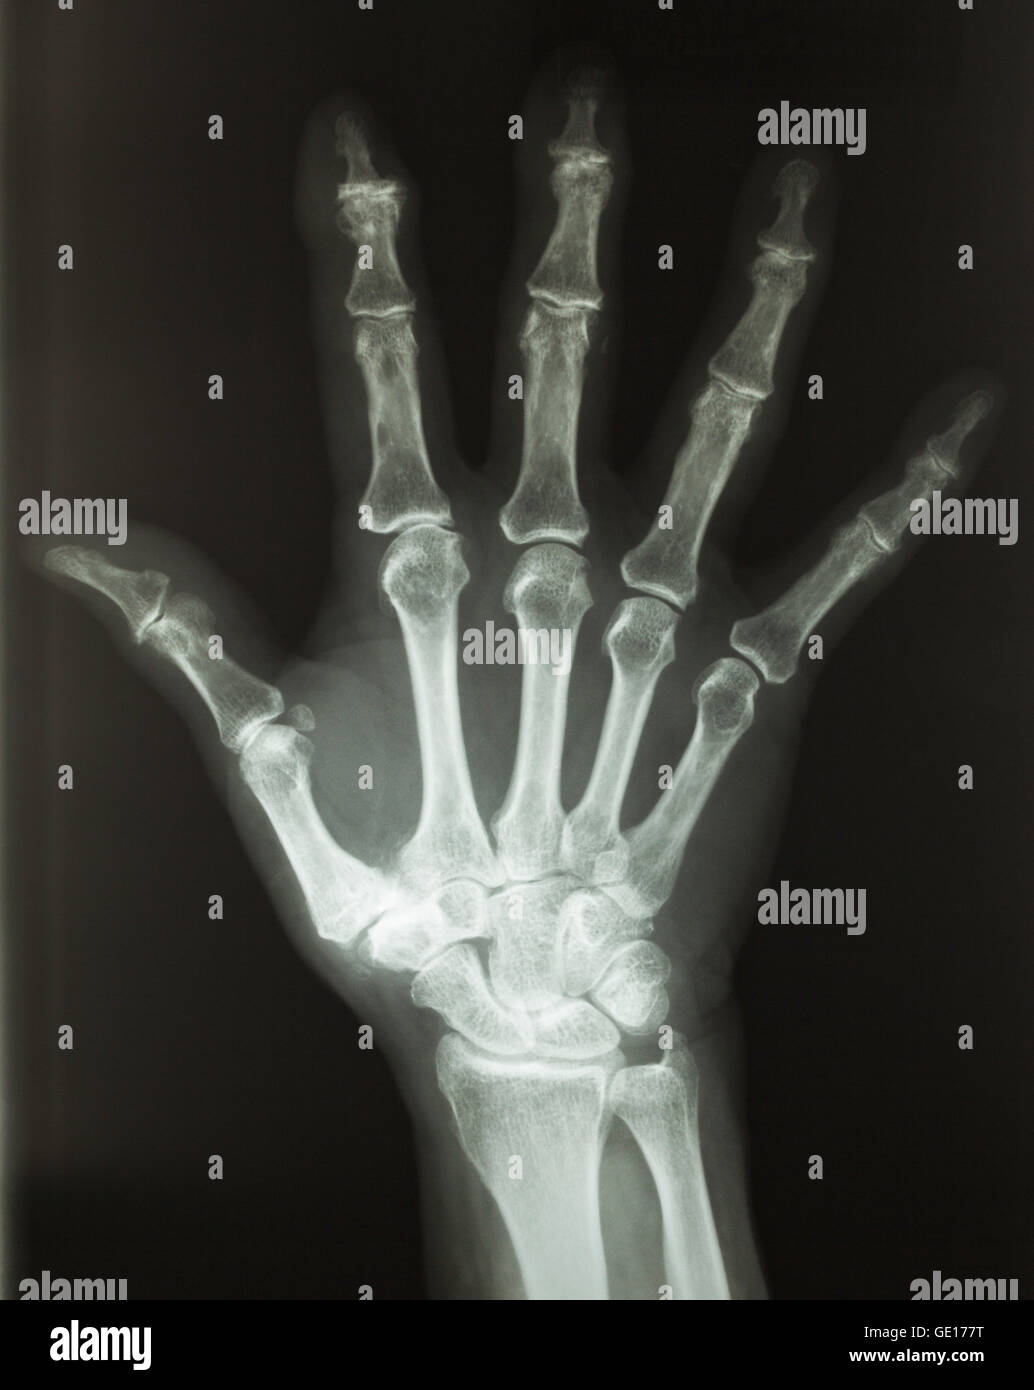 X-Ray of Human Hand From the Top View with Fingers Spread Out. Stock Photo